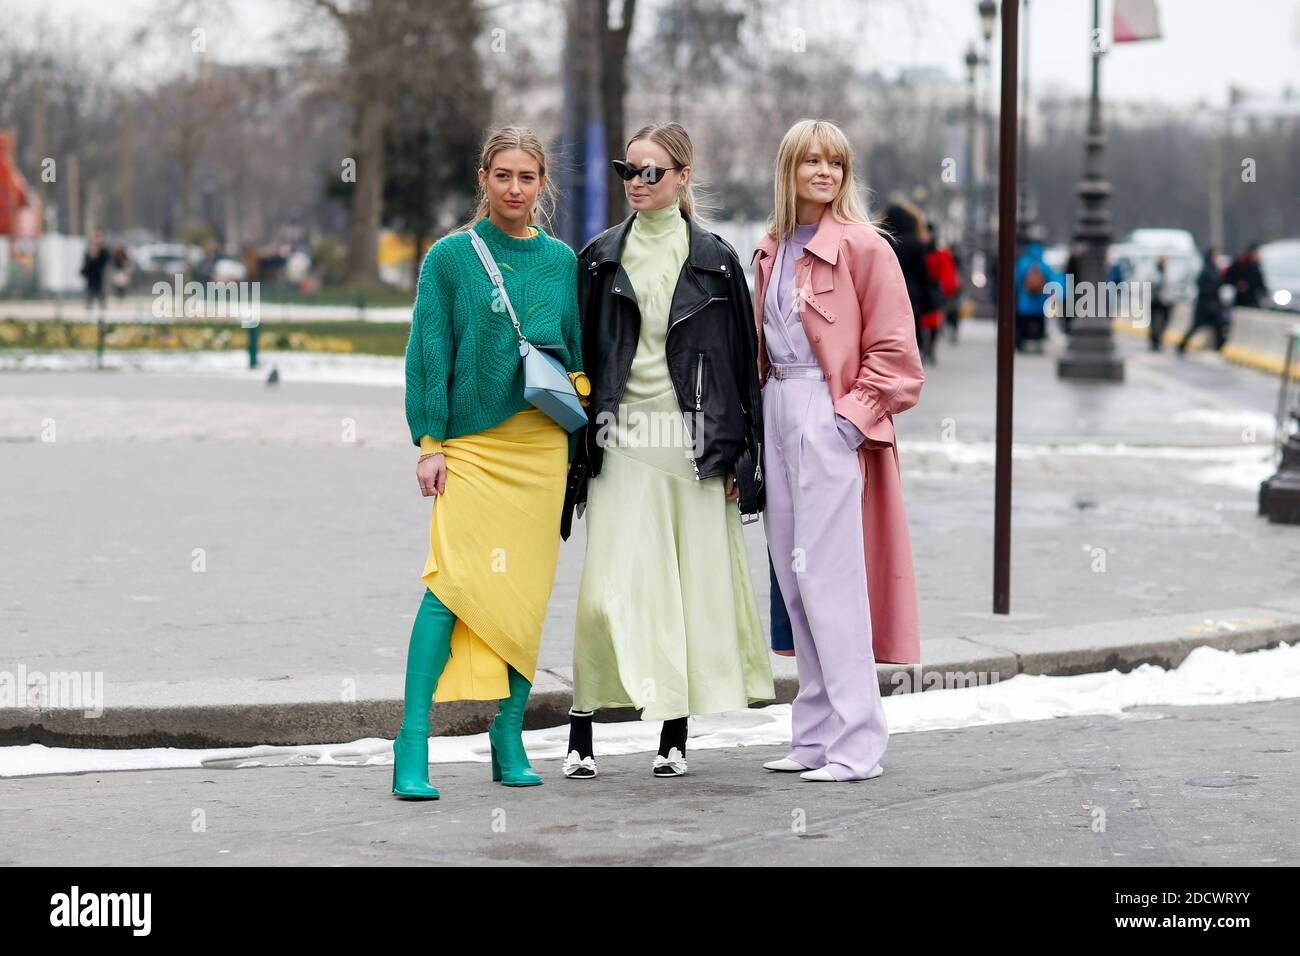 Street style, Emili Sindlev, Thora Valdimars and Jeanette Friis Madsen  arriving at Paco Rabanne Fall-Winter 2018-2019 show held at Grand Palais in  Paris, France, on March 1, 2018. Photo by Marie-Paola  Bertrand-Hillion/ABACAPRESS.COM